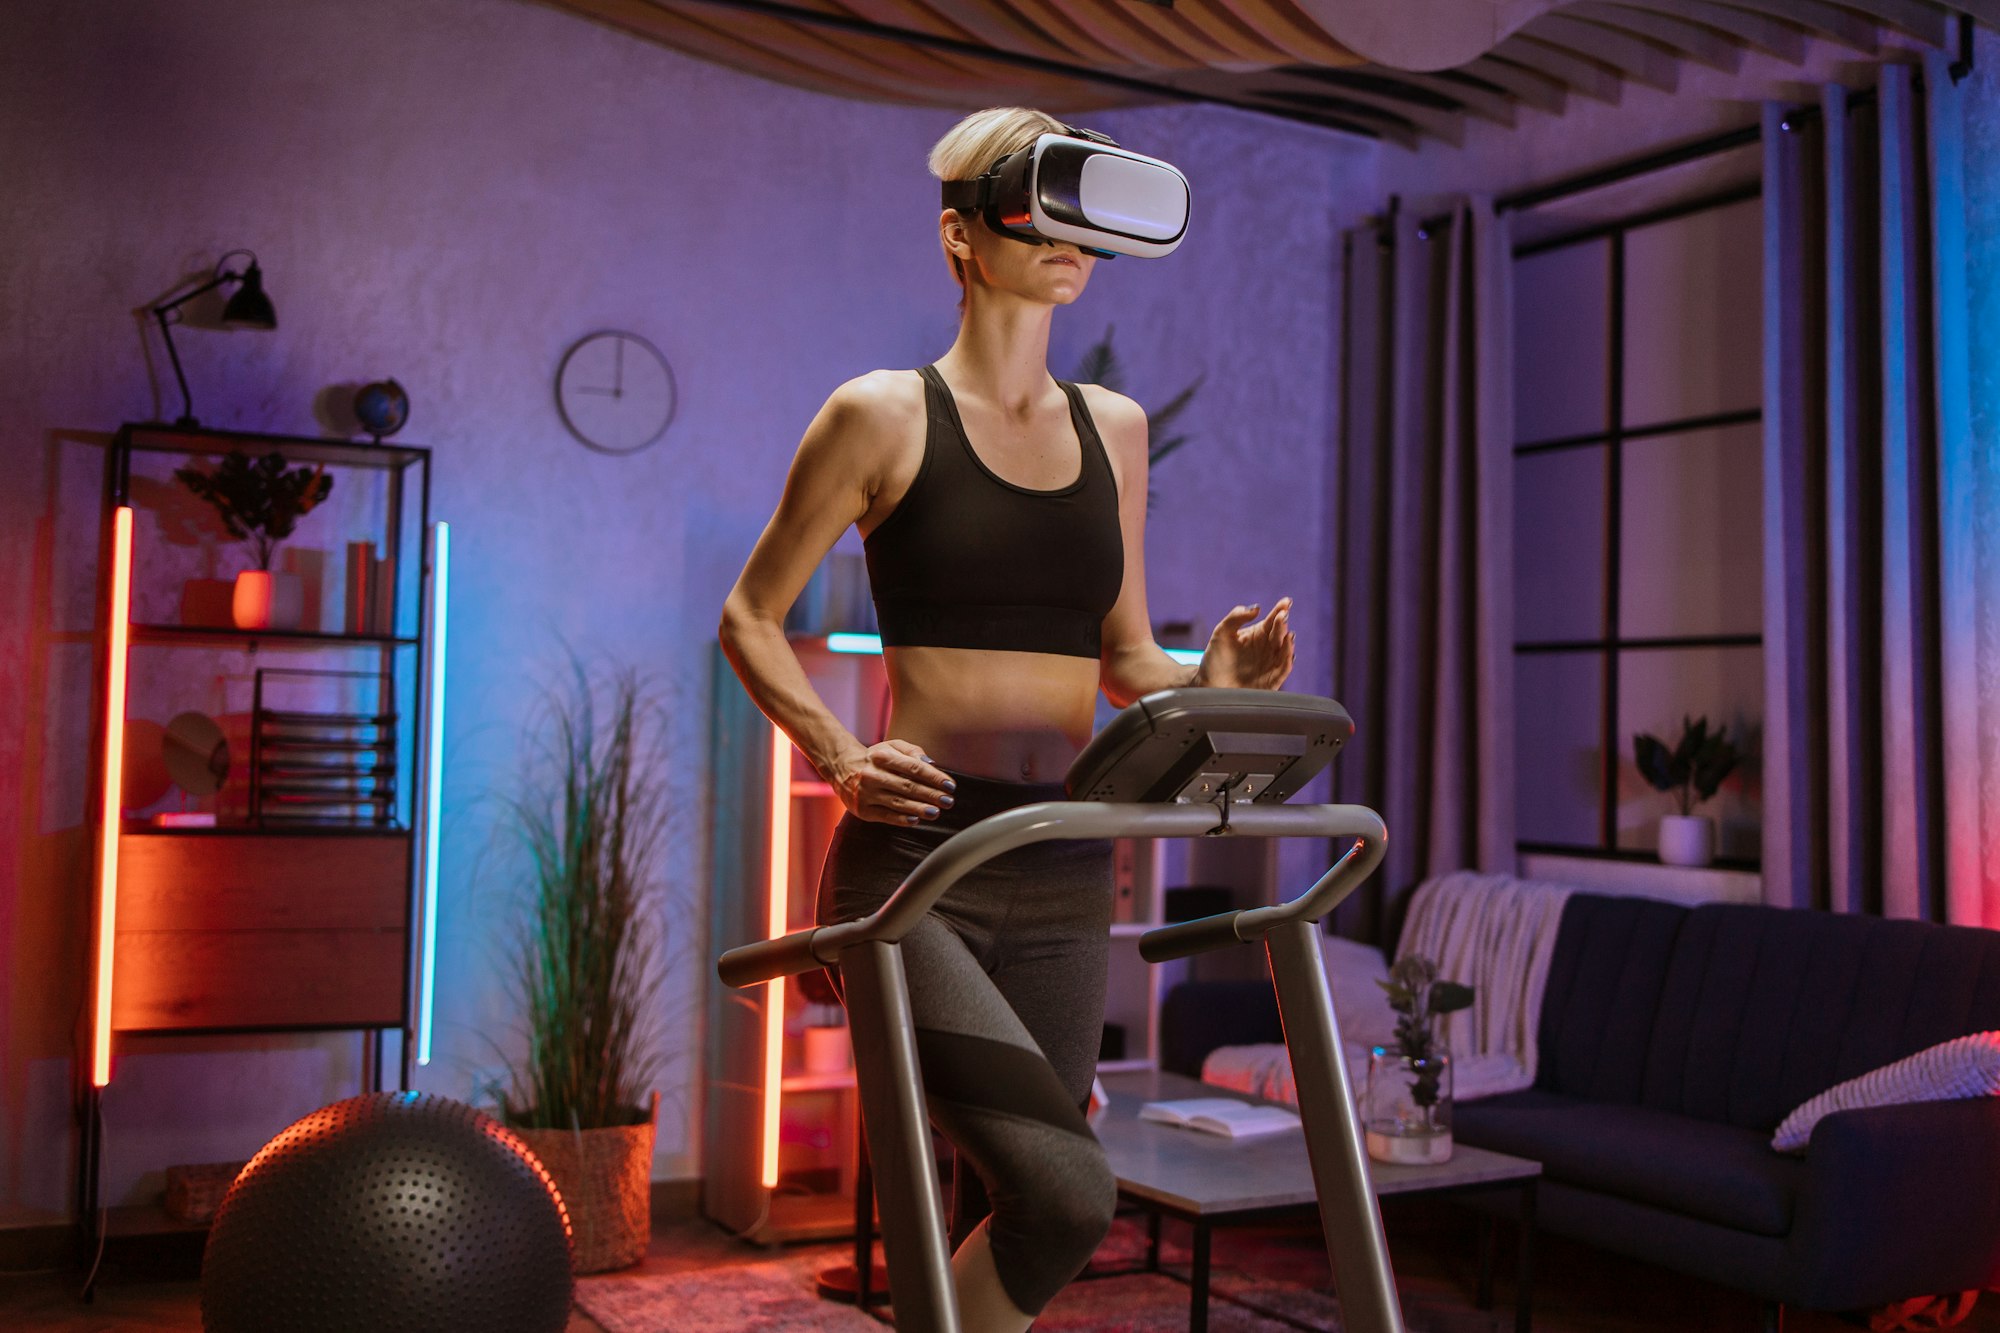 Caucasian woman doing fitness exercise, running on treadmill using virtual reality glasses